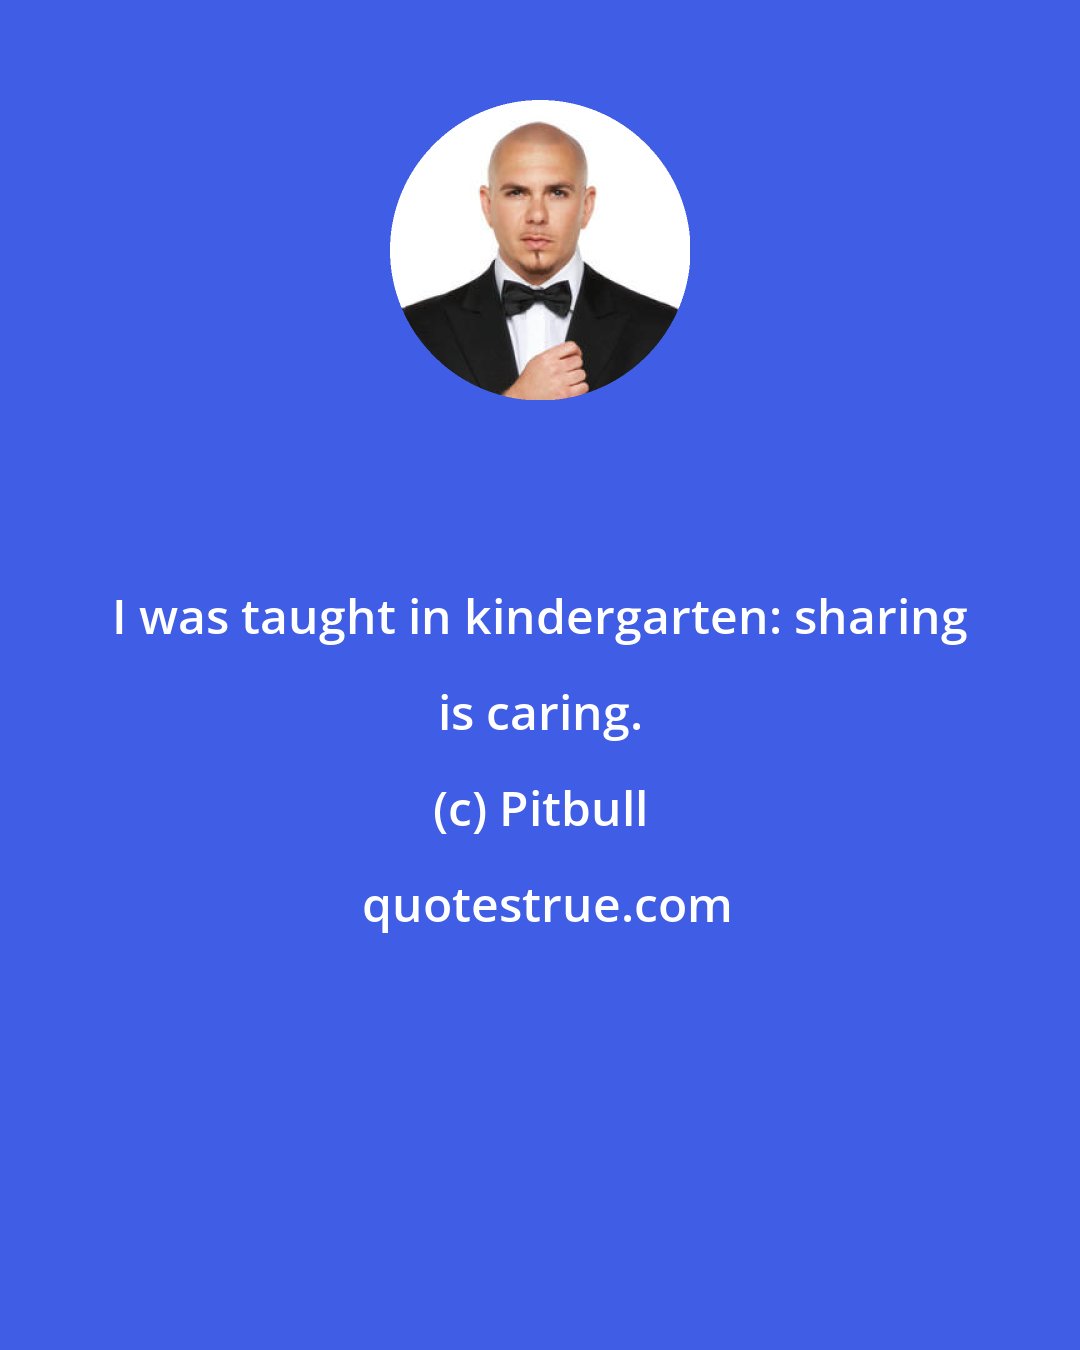 Pitbull: I was taught in kindergarten: sharing is caring.